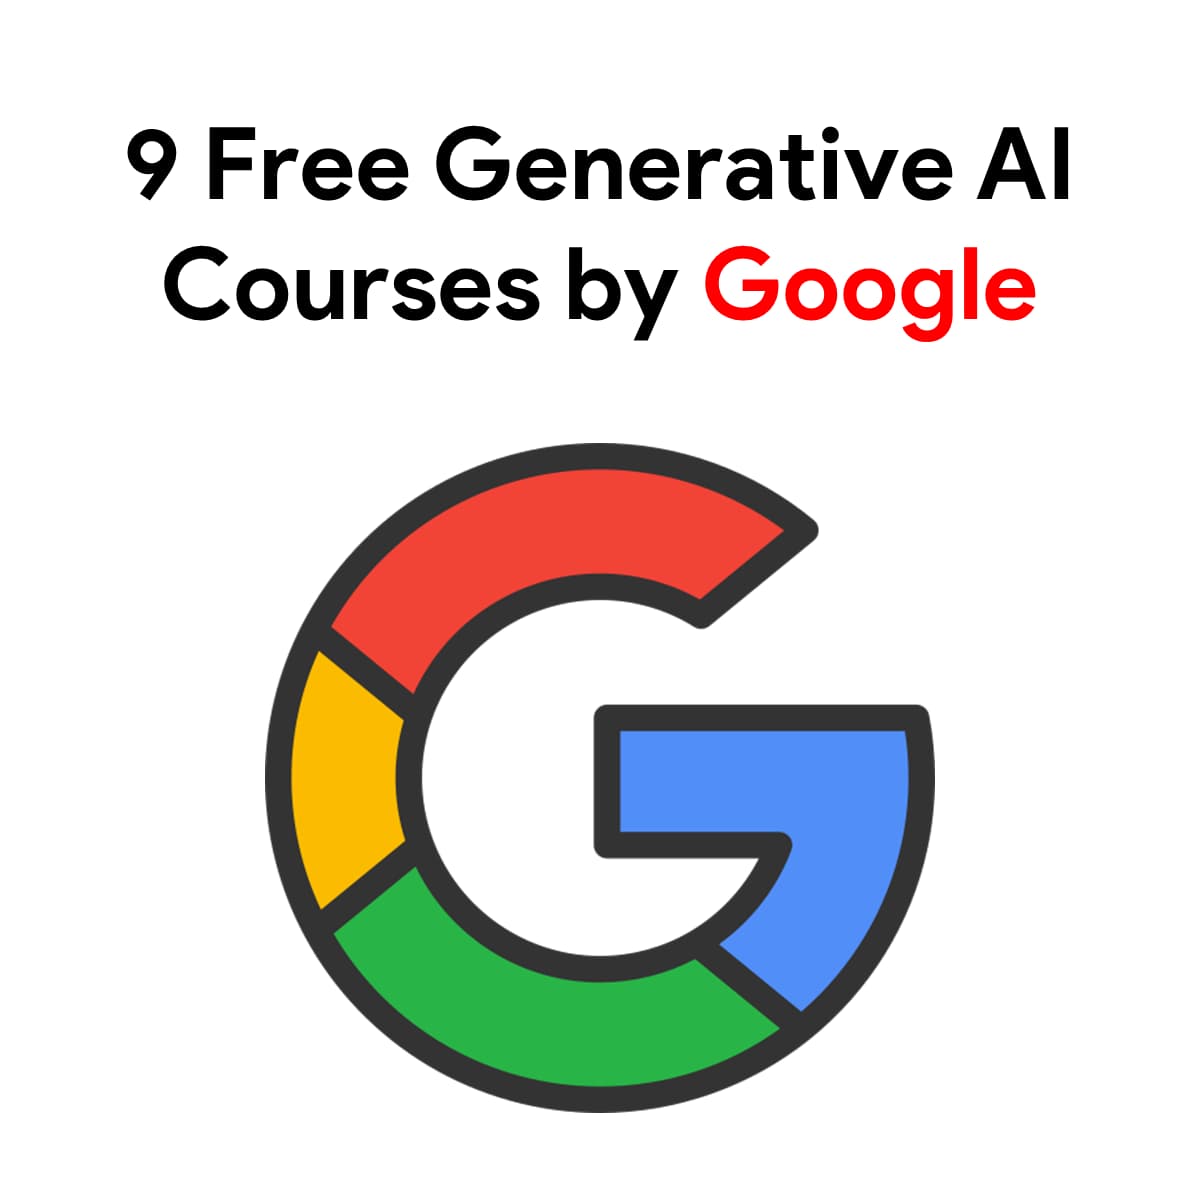 Free Generative AI Courses By Google